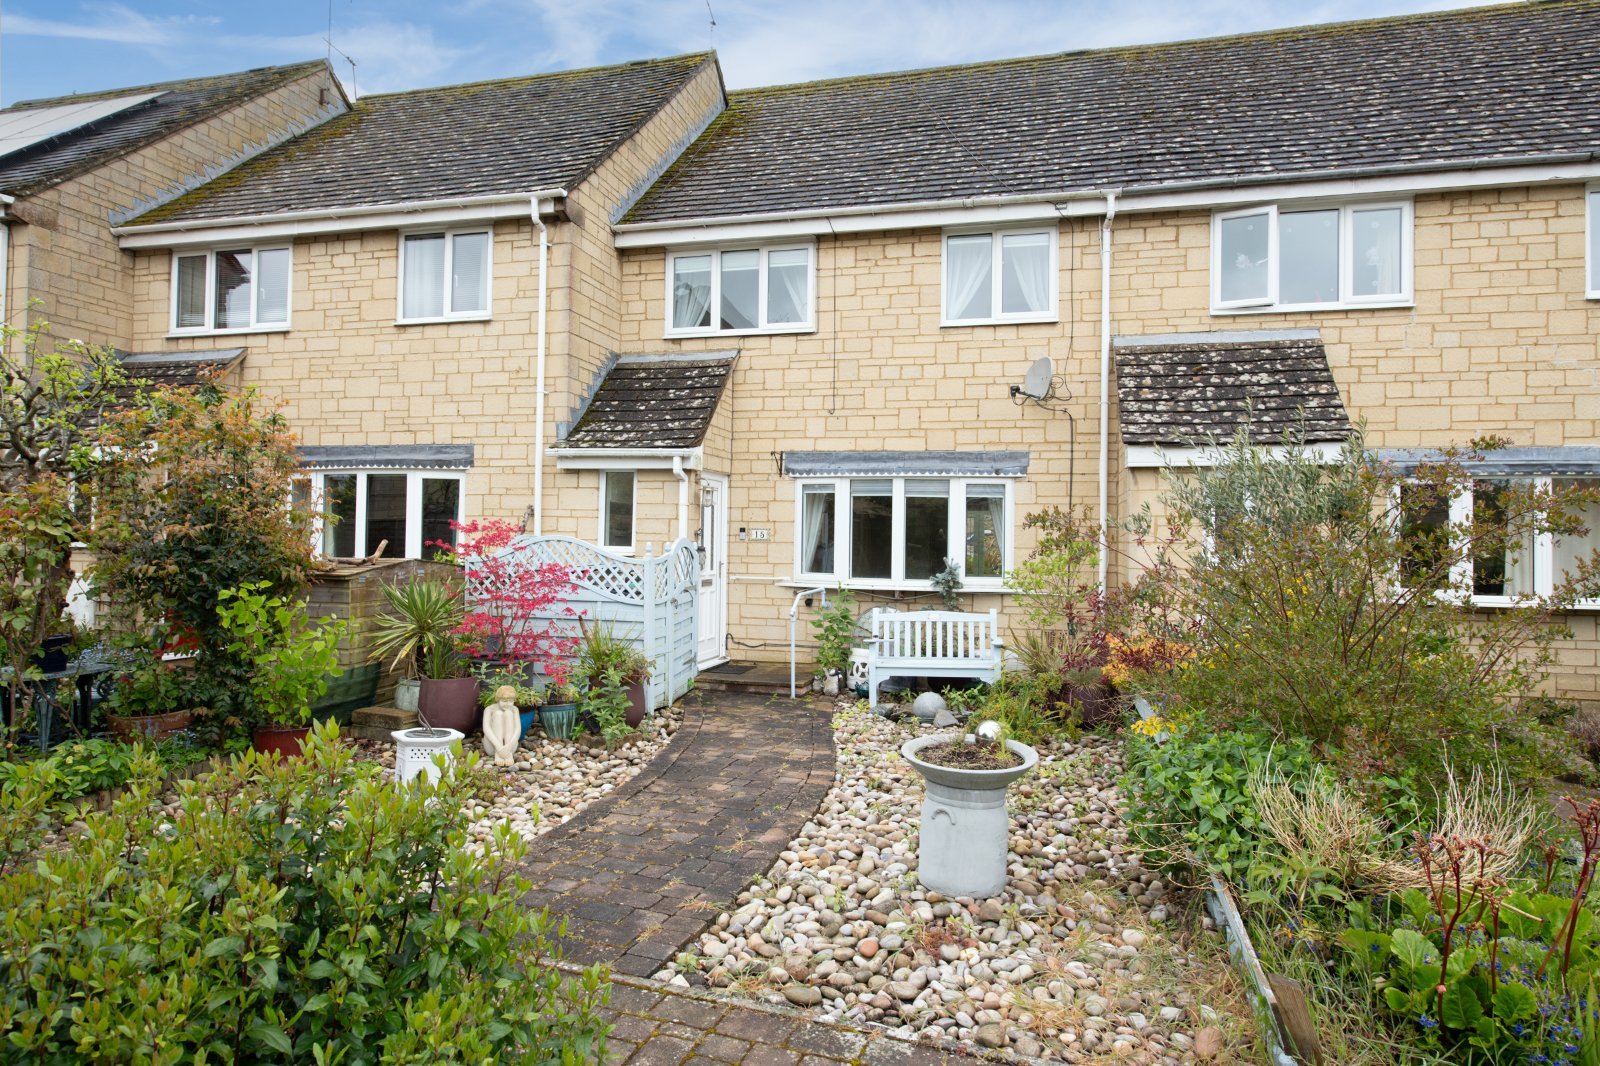 Chancel Way, Lechlade, Gloucestershire, GL7